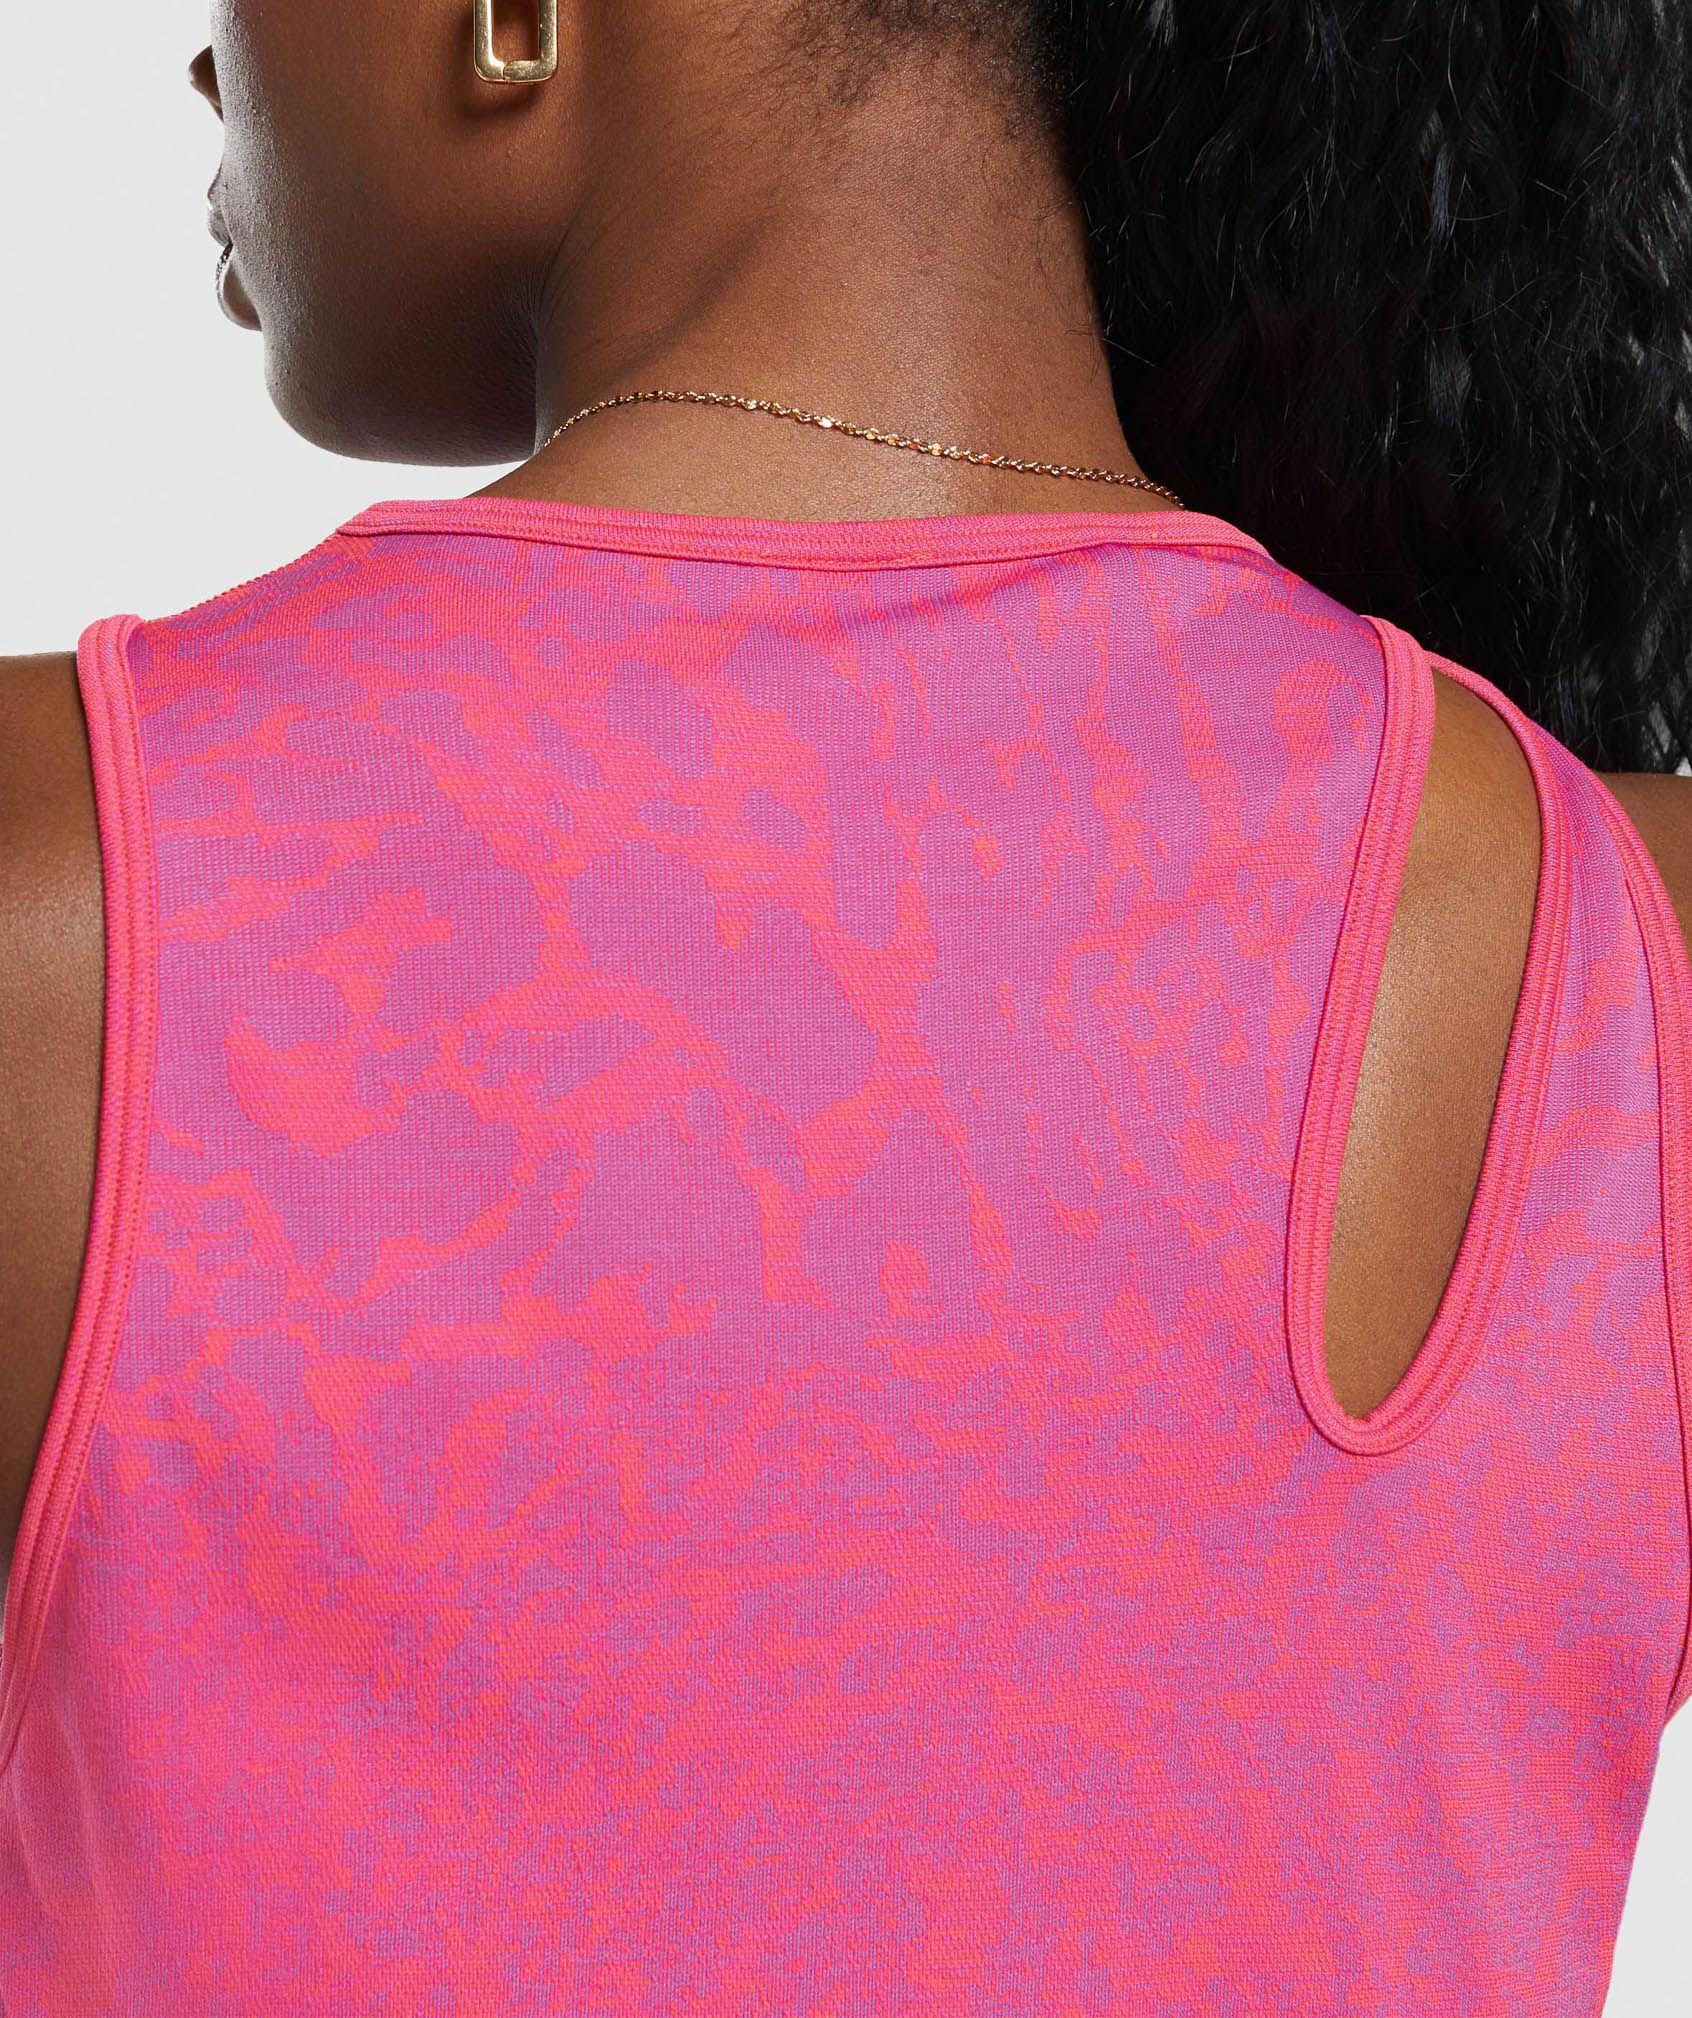 Adapt Safari Seamless Drop Arm Faded Tank in Shelly Pink/Fly Coral - view 6